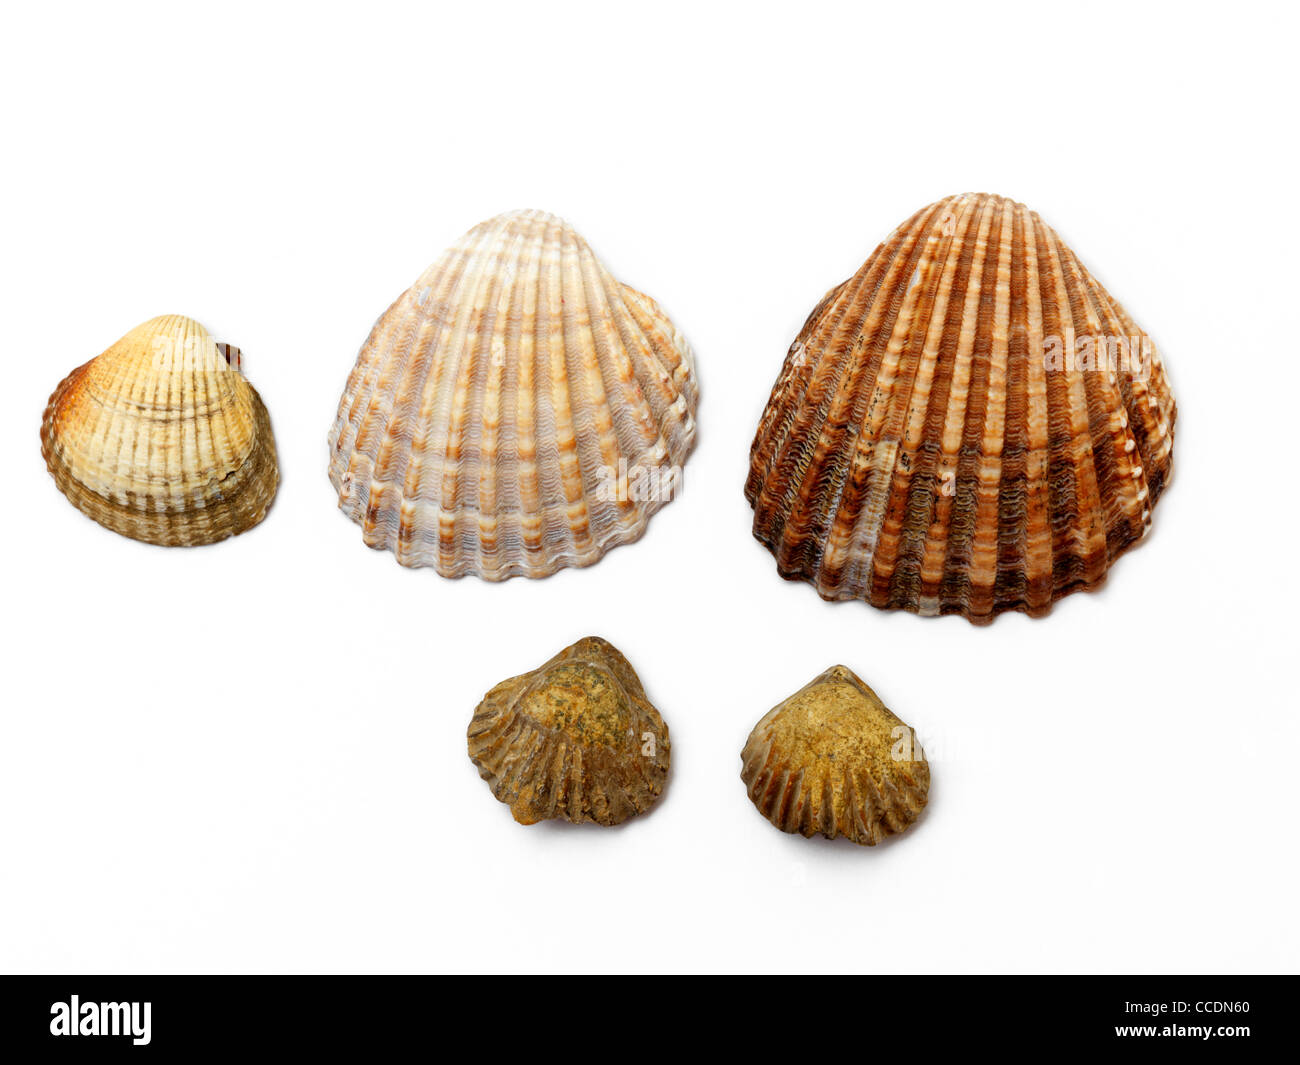 Cockle Shells With Fossils Of Shells Stock Photo